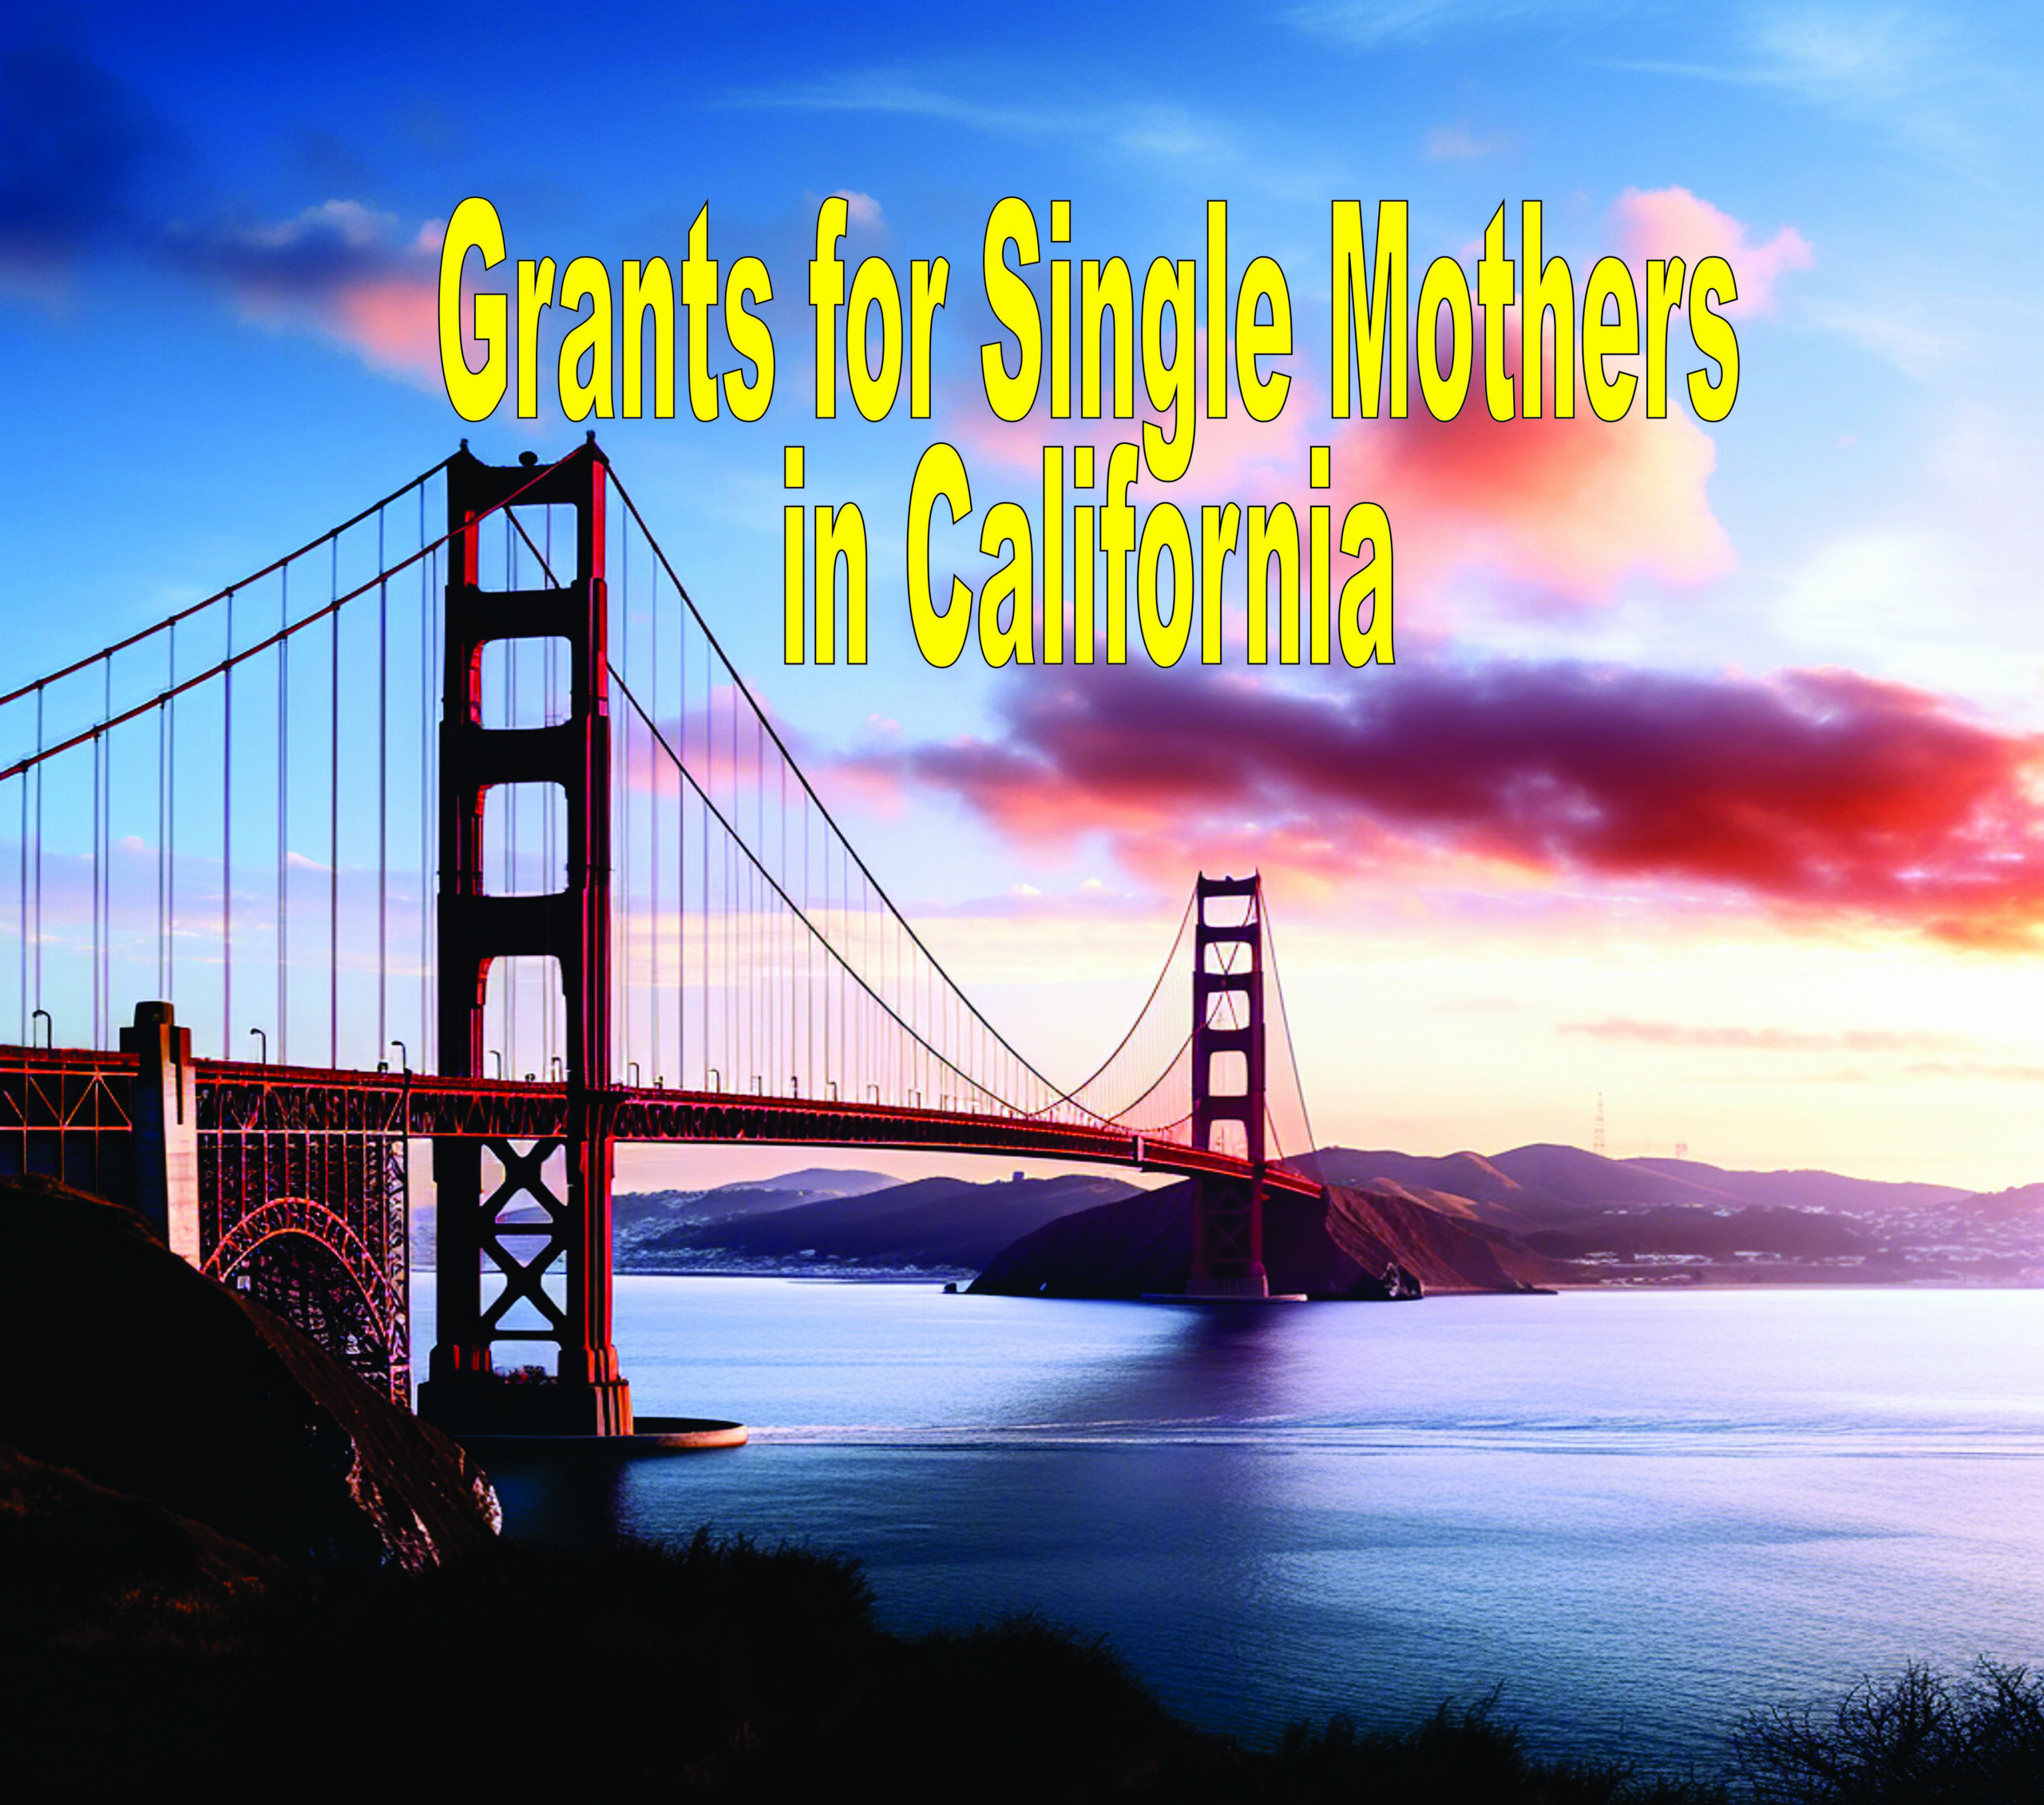 Grants For Single Mothers In California